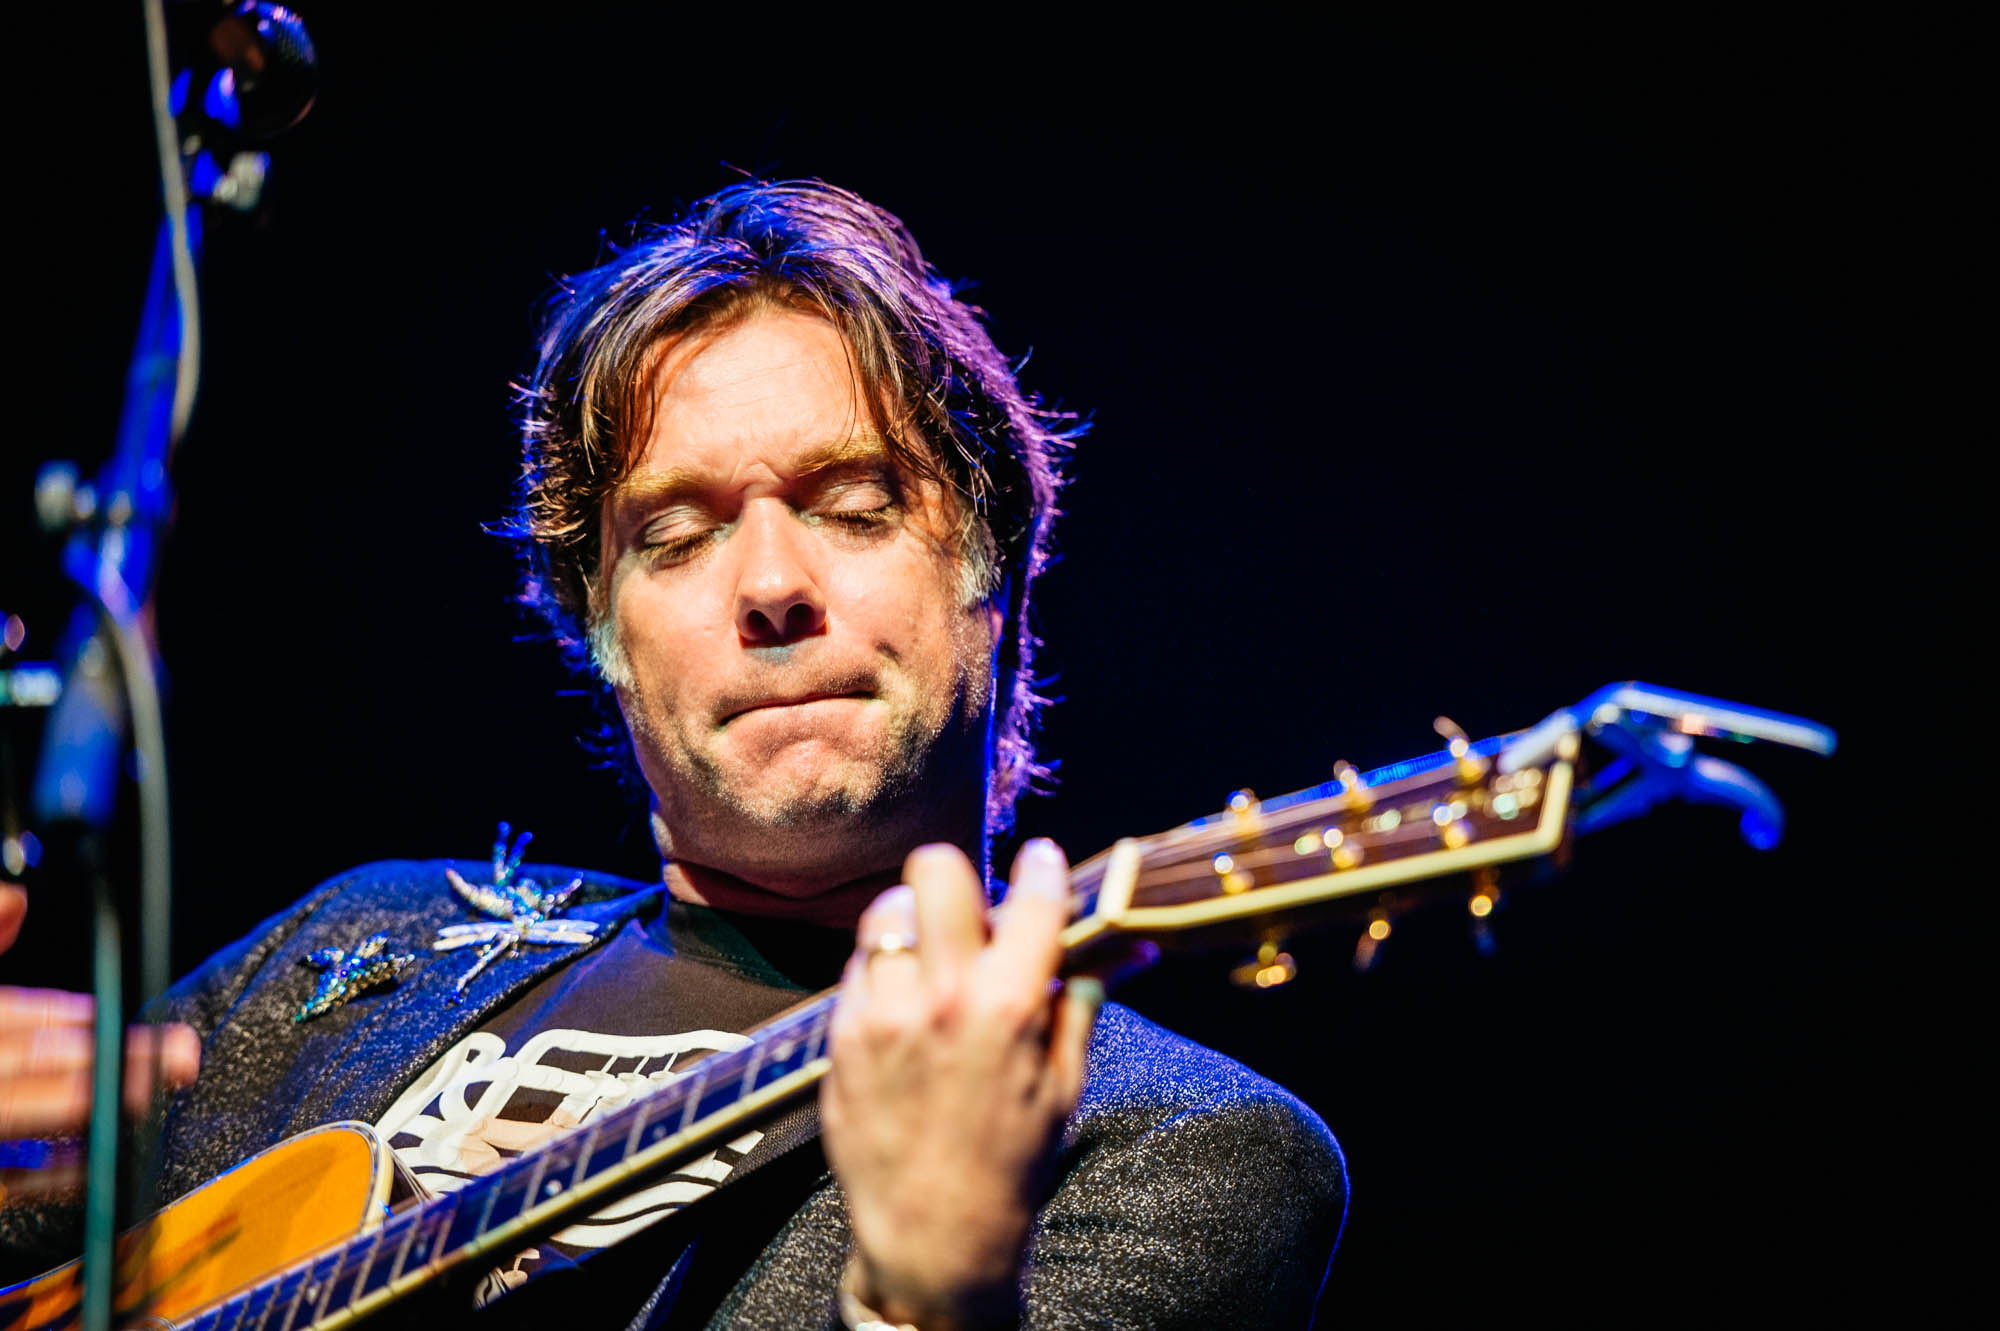 A photo of Rufus Wainwright at the Festival of Voice onstage playing a guitar